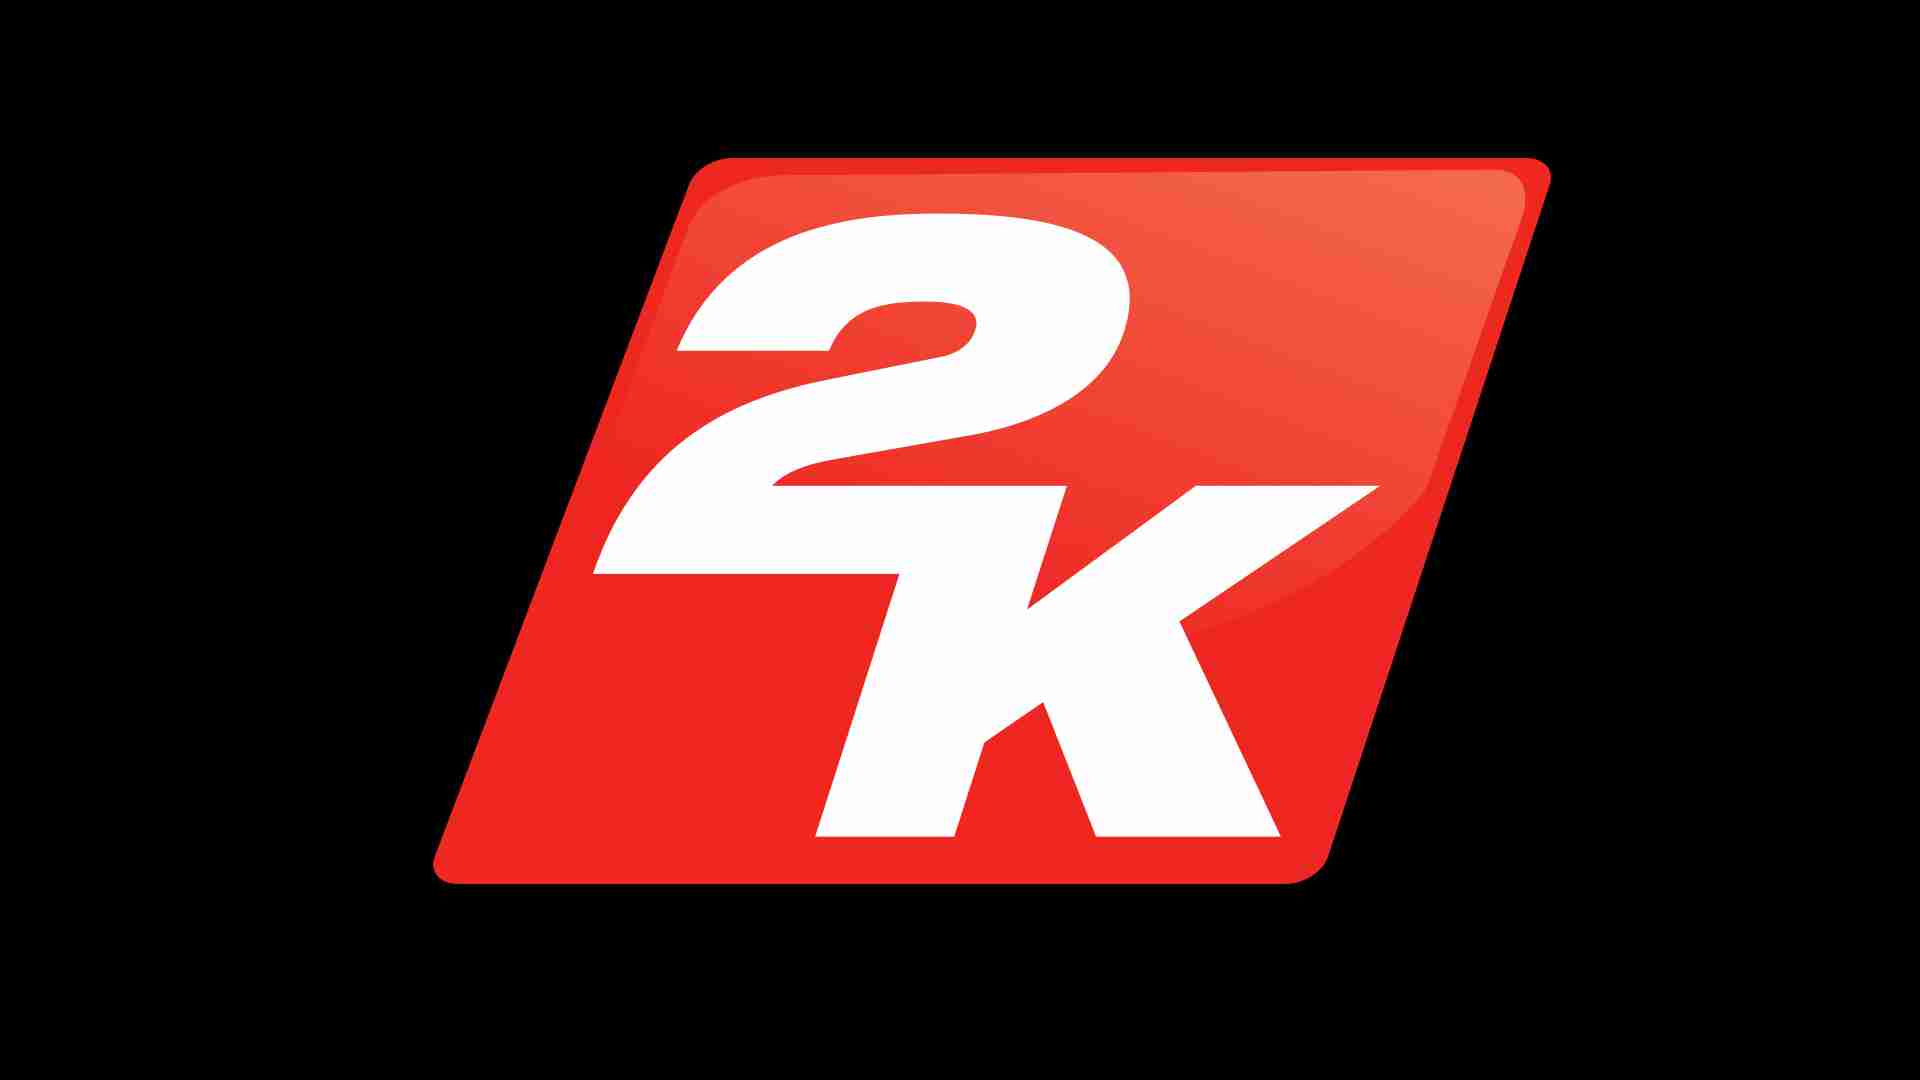 2K Games For Nintendo Switch – Announcement Trailer